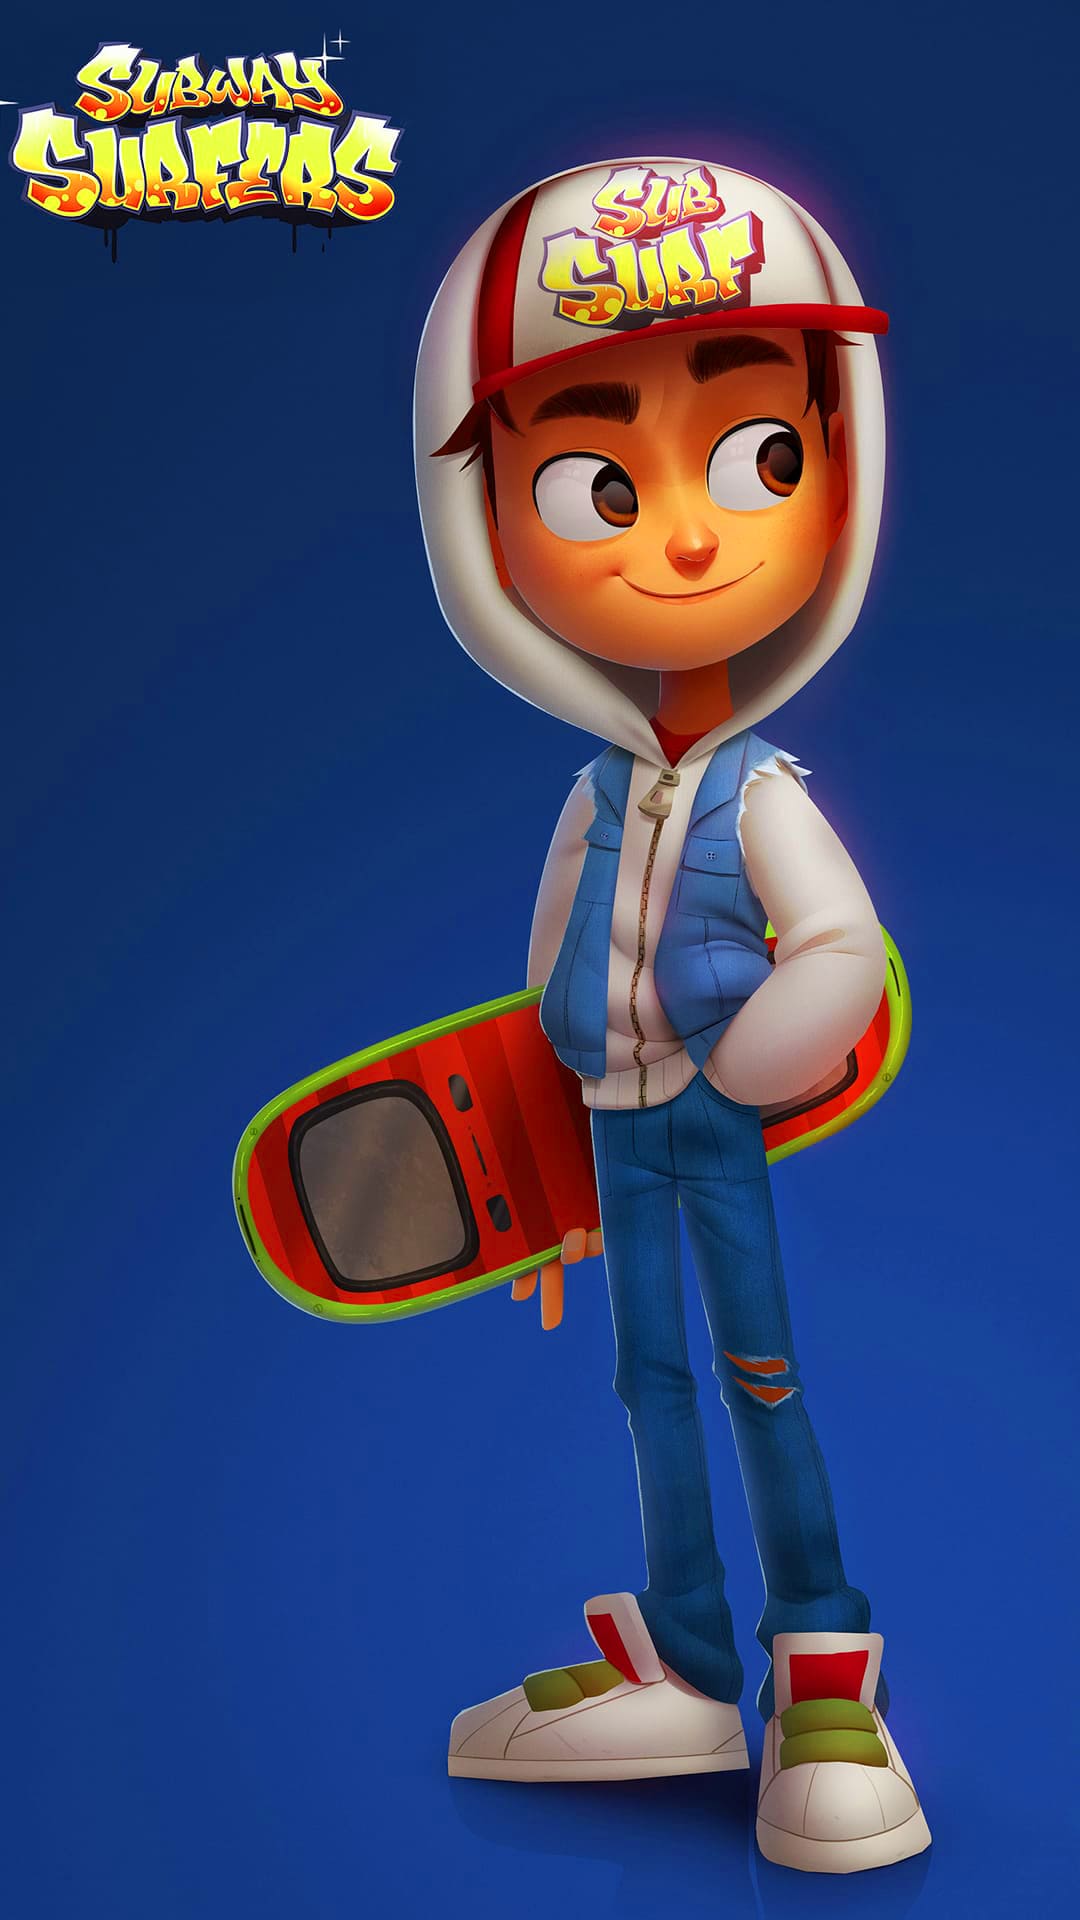 Subway Surfers Wallpapers